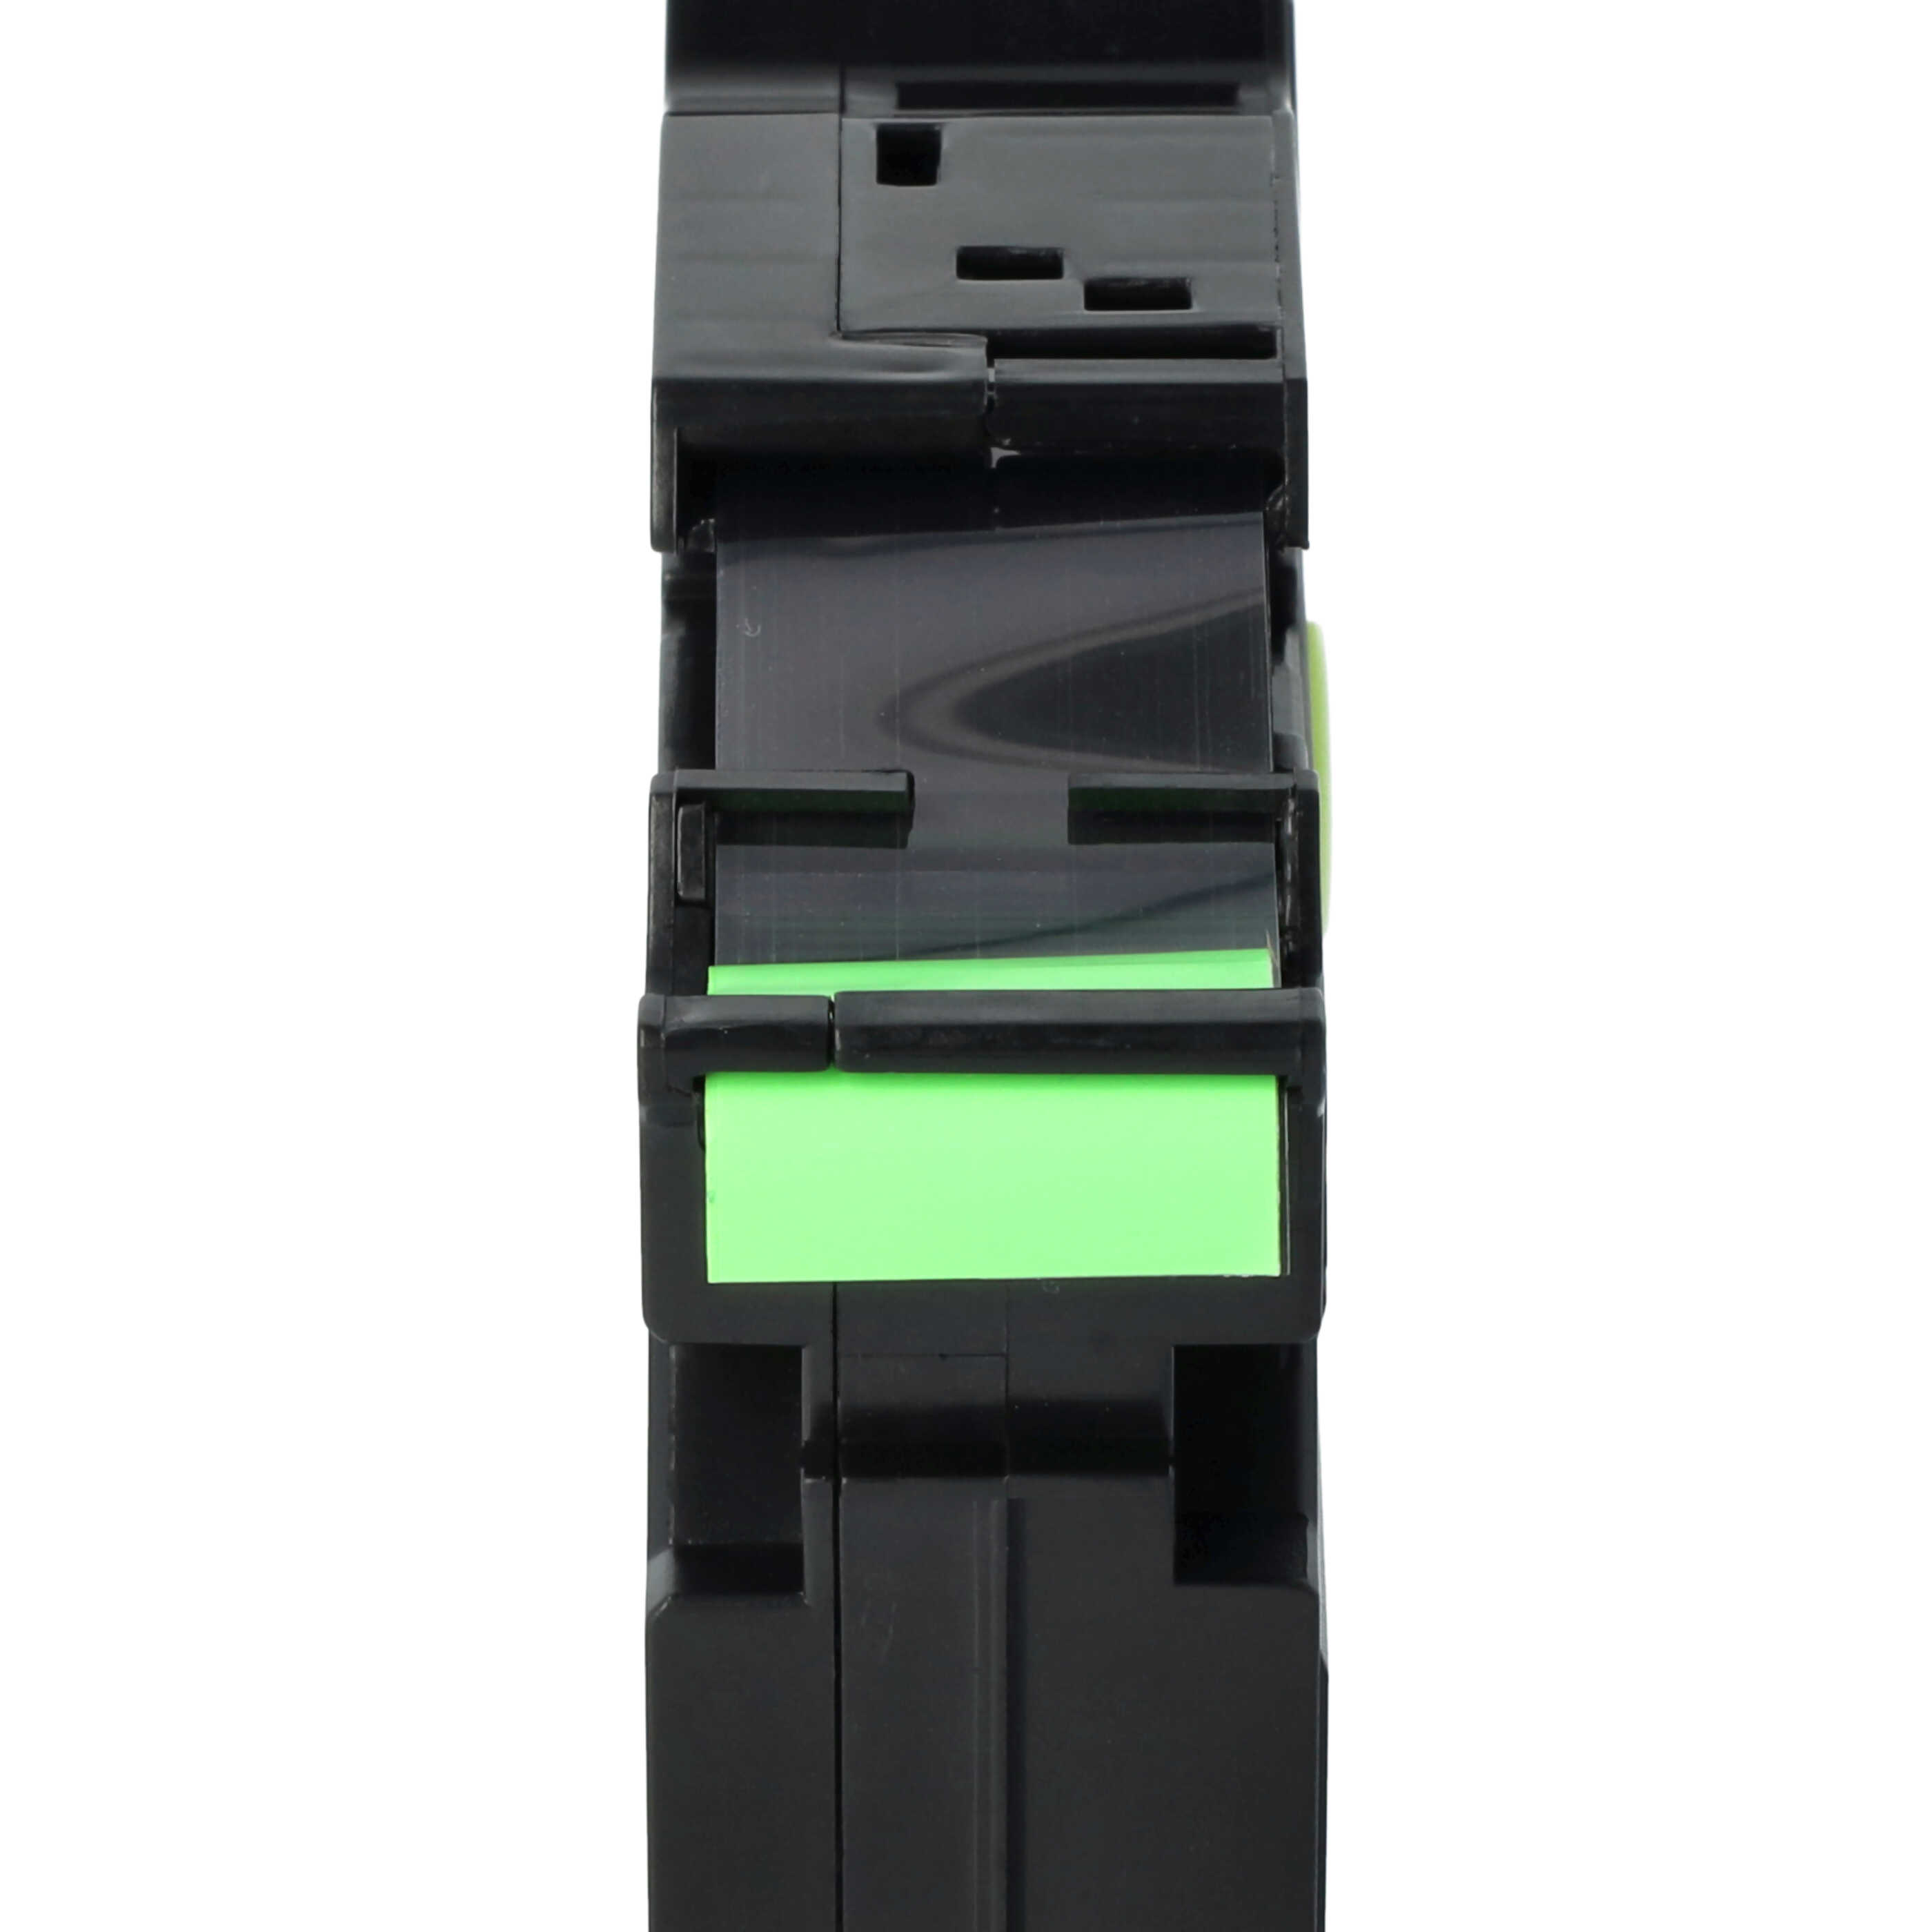 Label Tape as Replacement for Brother TZE-241, TZ-241 - 18 mm Black to Neon-Green